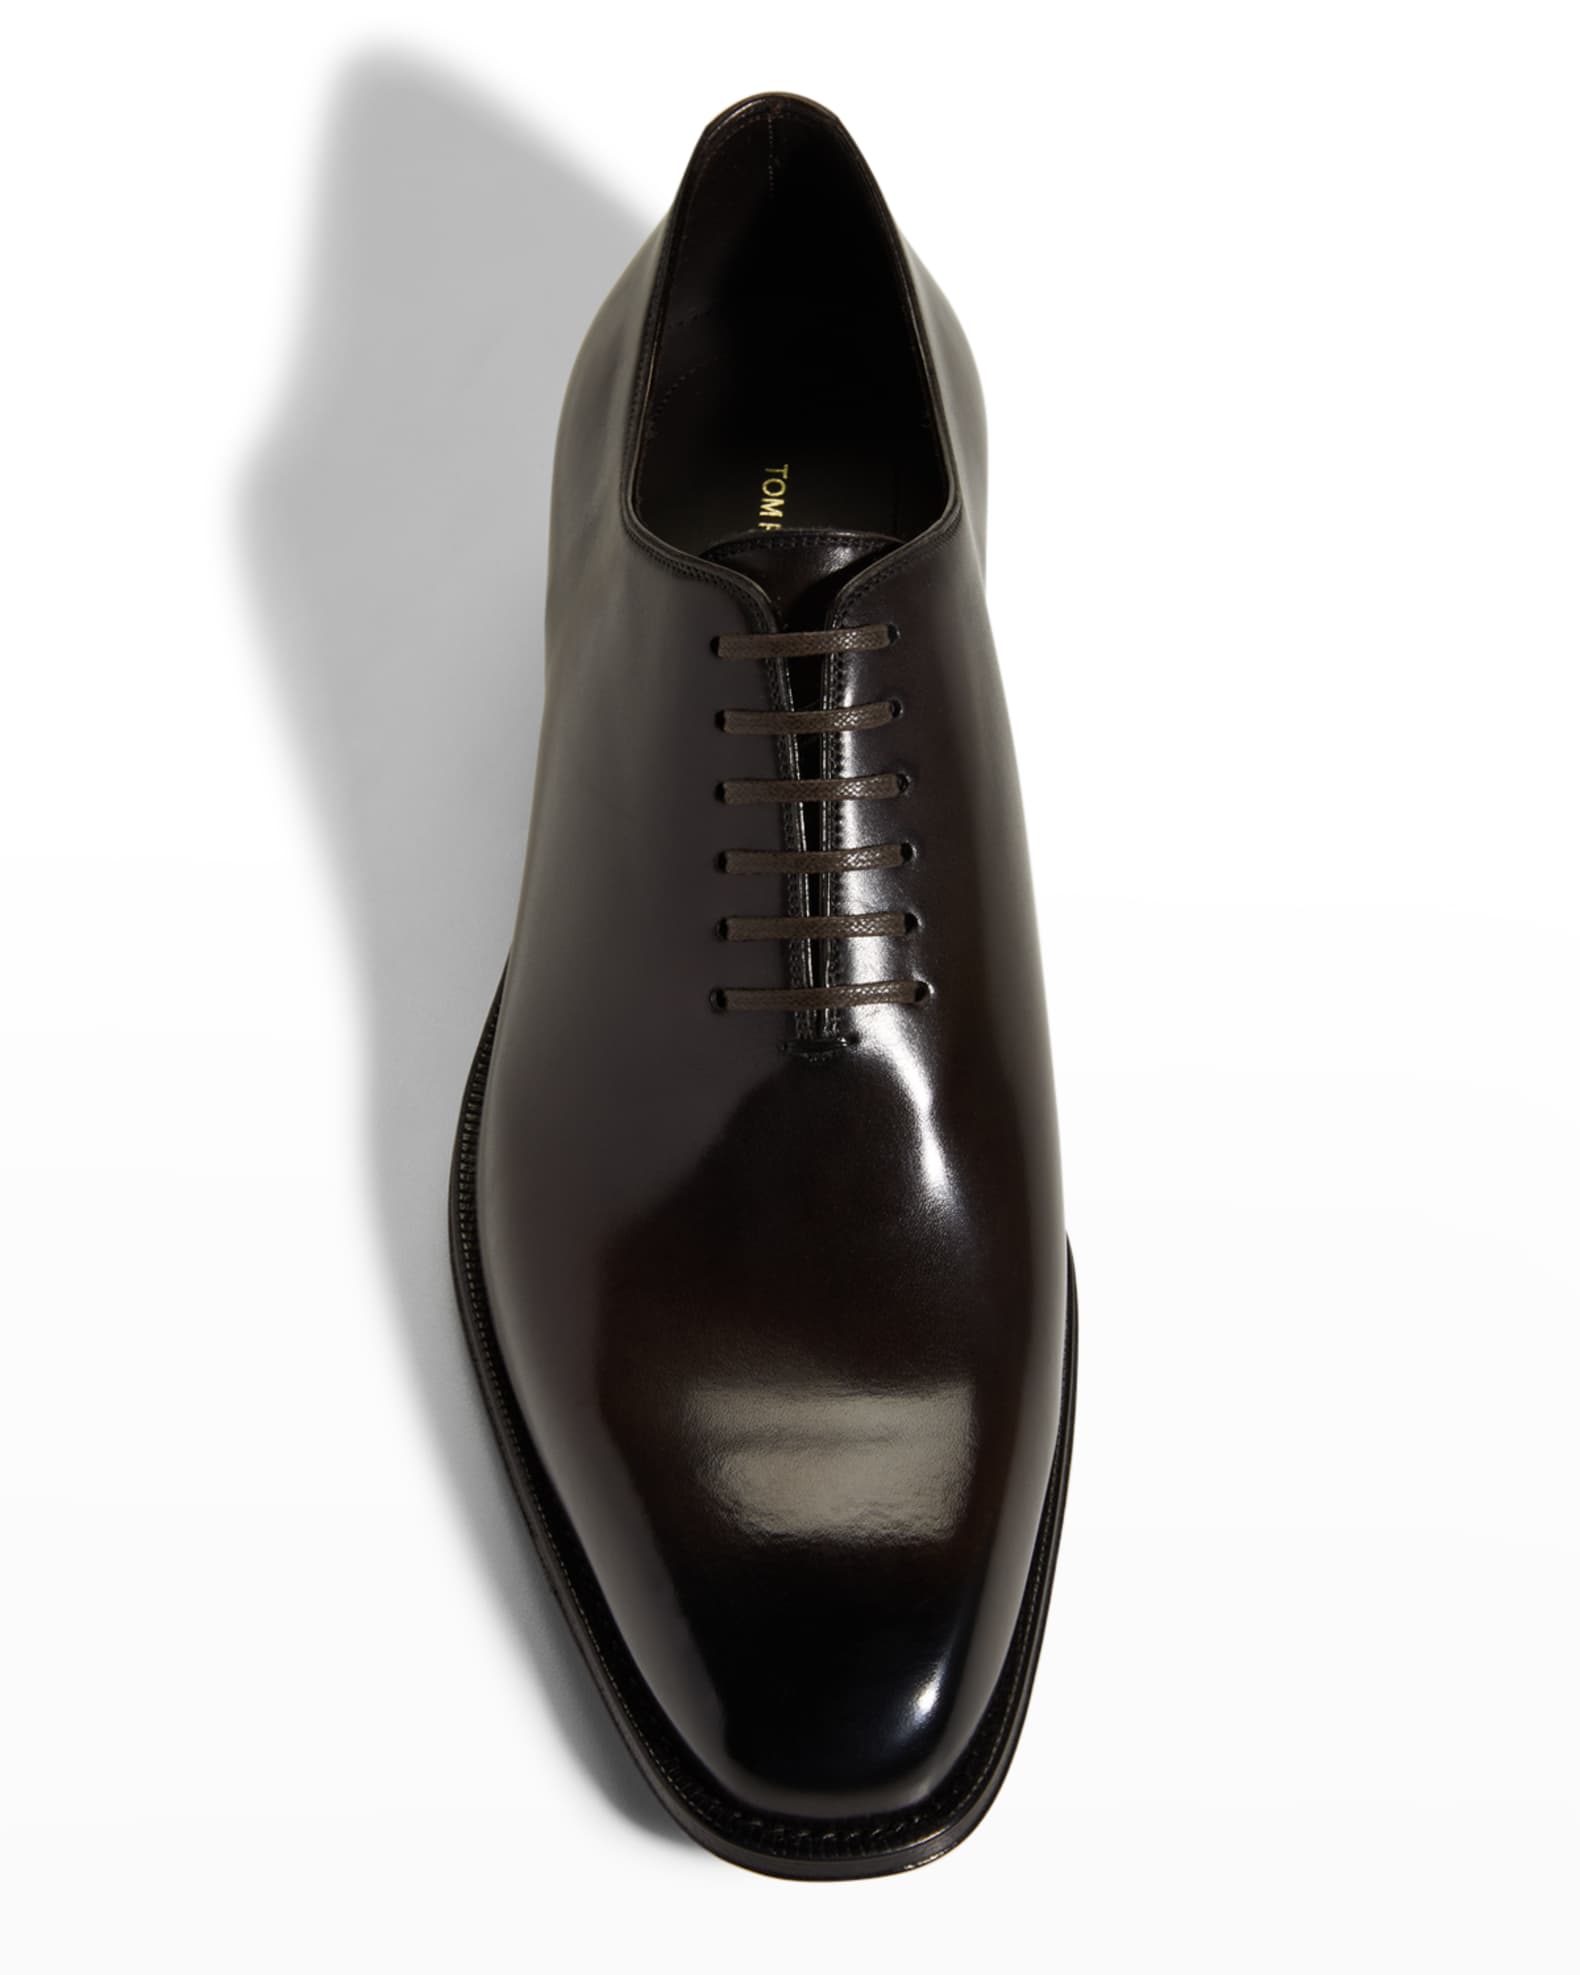 TOM FORD Men's Claydon Burnished Leather Oxfords | Neiman Marcus